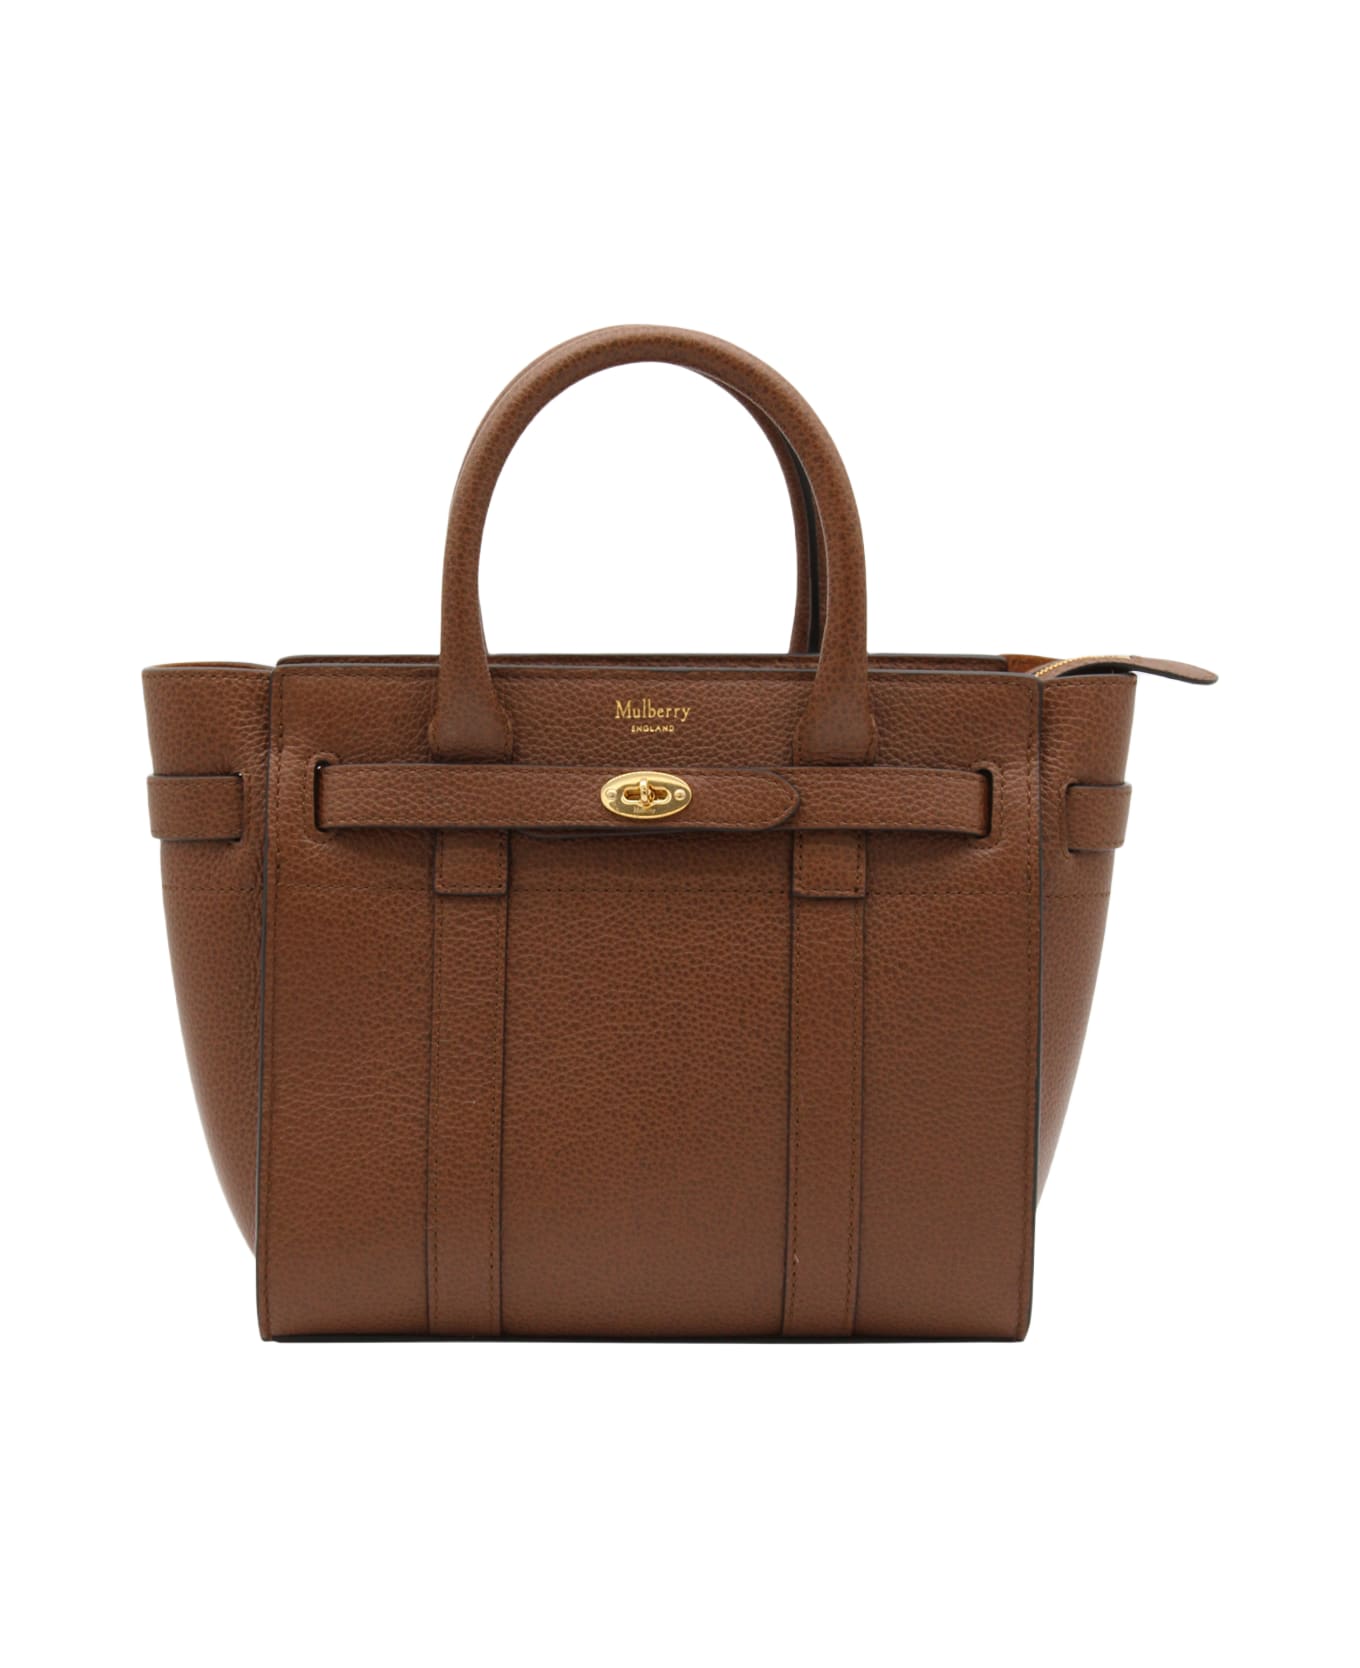 Mulberry Brown Leather Bayswater Handle Bag - OAK